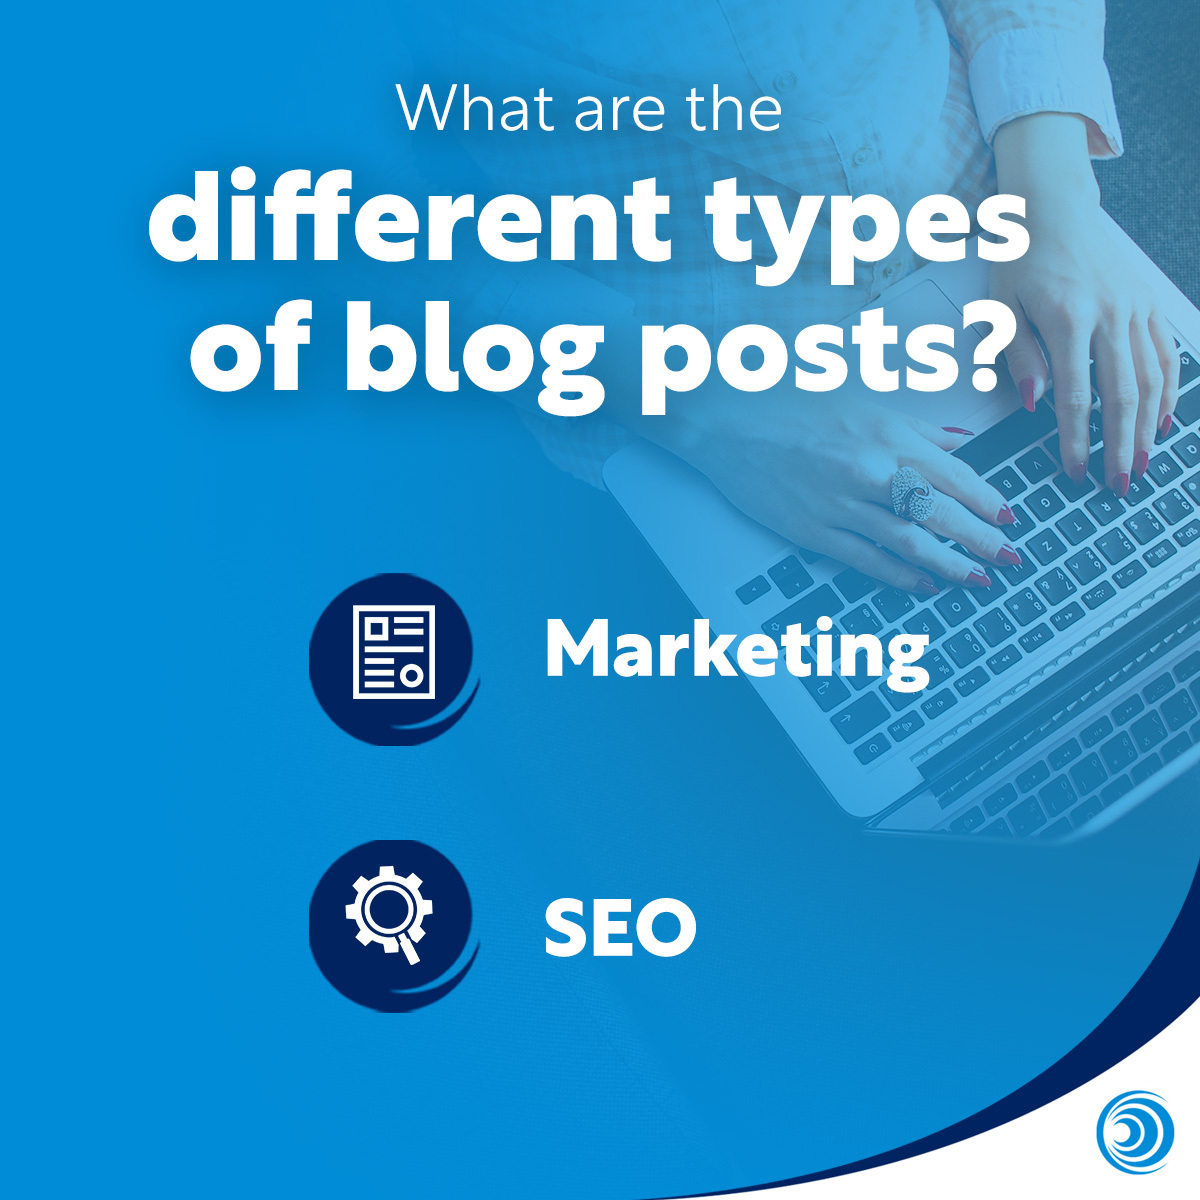 bullet points for what are the different types of blog post